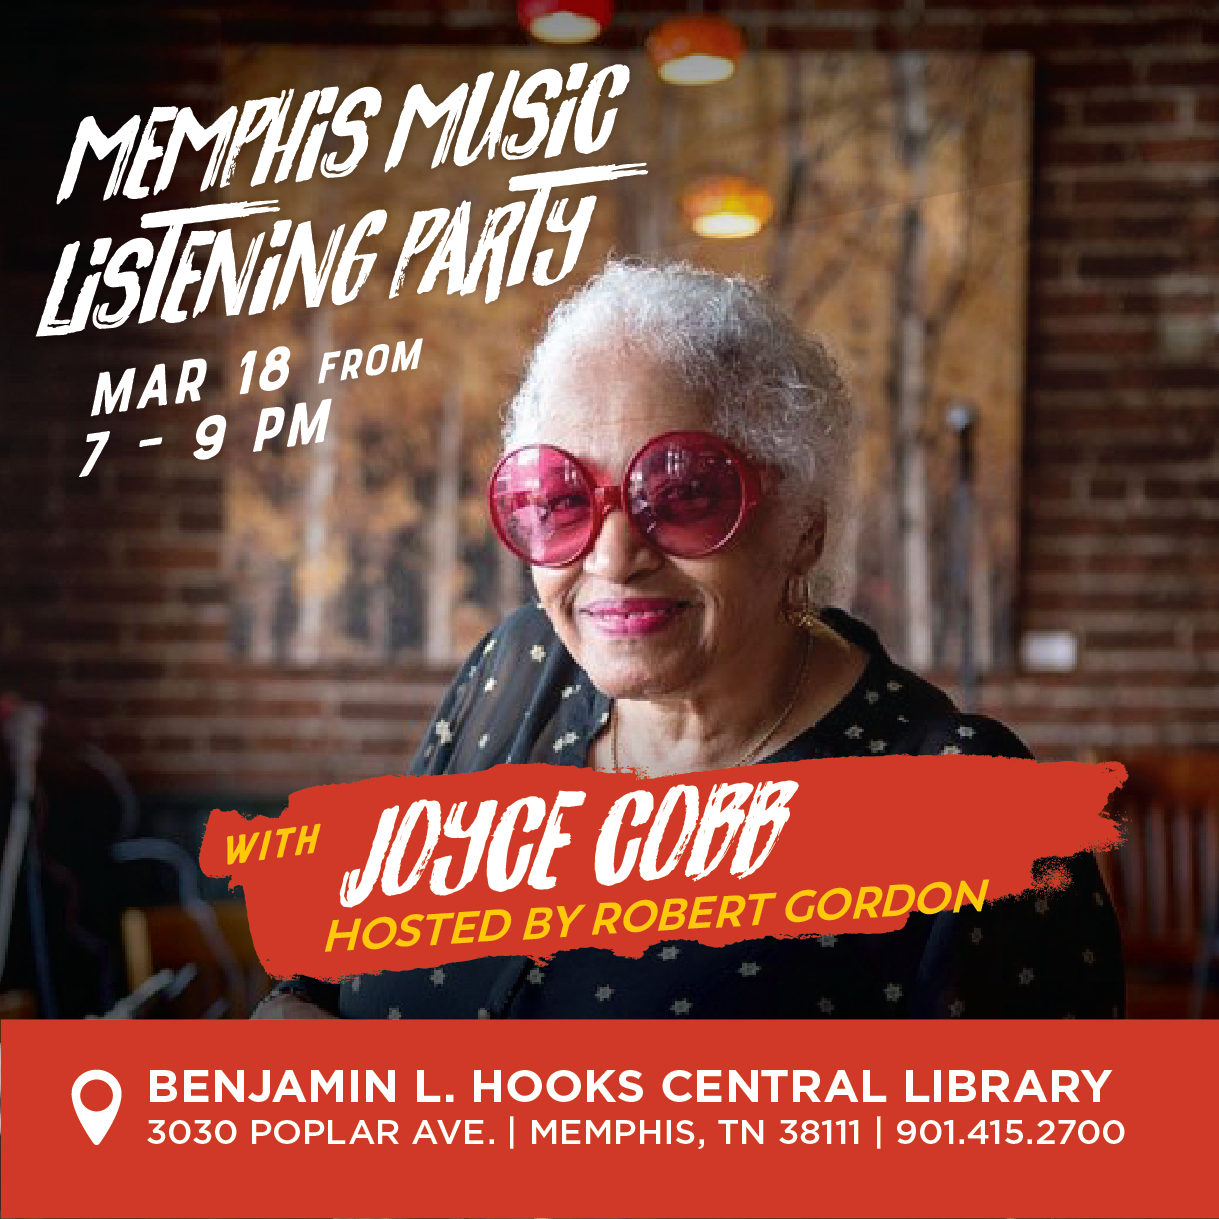 Memphis Music Listening Party with Joyce Cobb